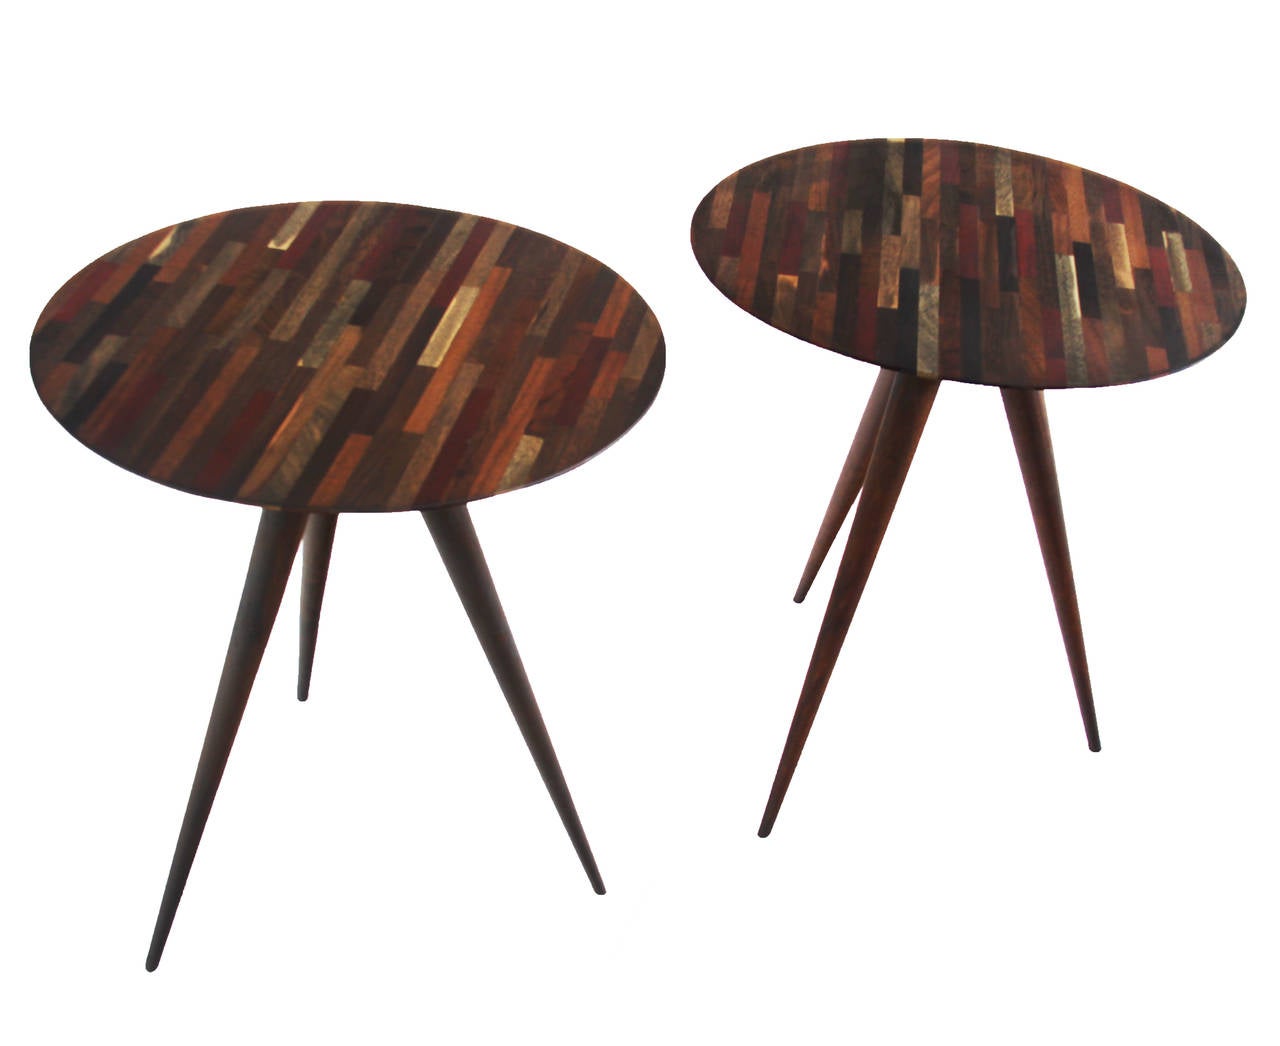 Laminated patchwork end tables or lamp tables made from a variety of solid Brazilian exotic hardwoods and designed by Tunico T. The Portuguese name roughly translates into "toothpick leg." Wood types include Muirapiranga, Roxinho,